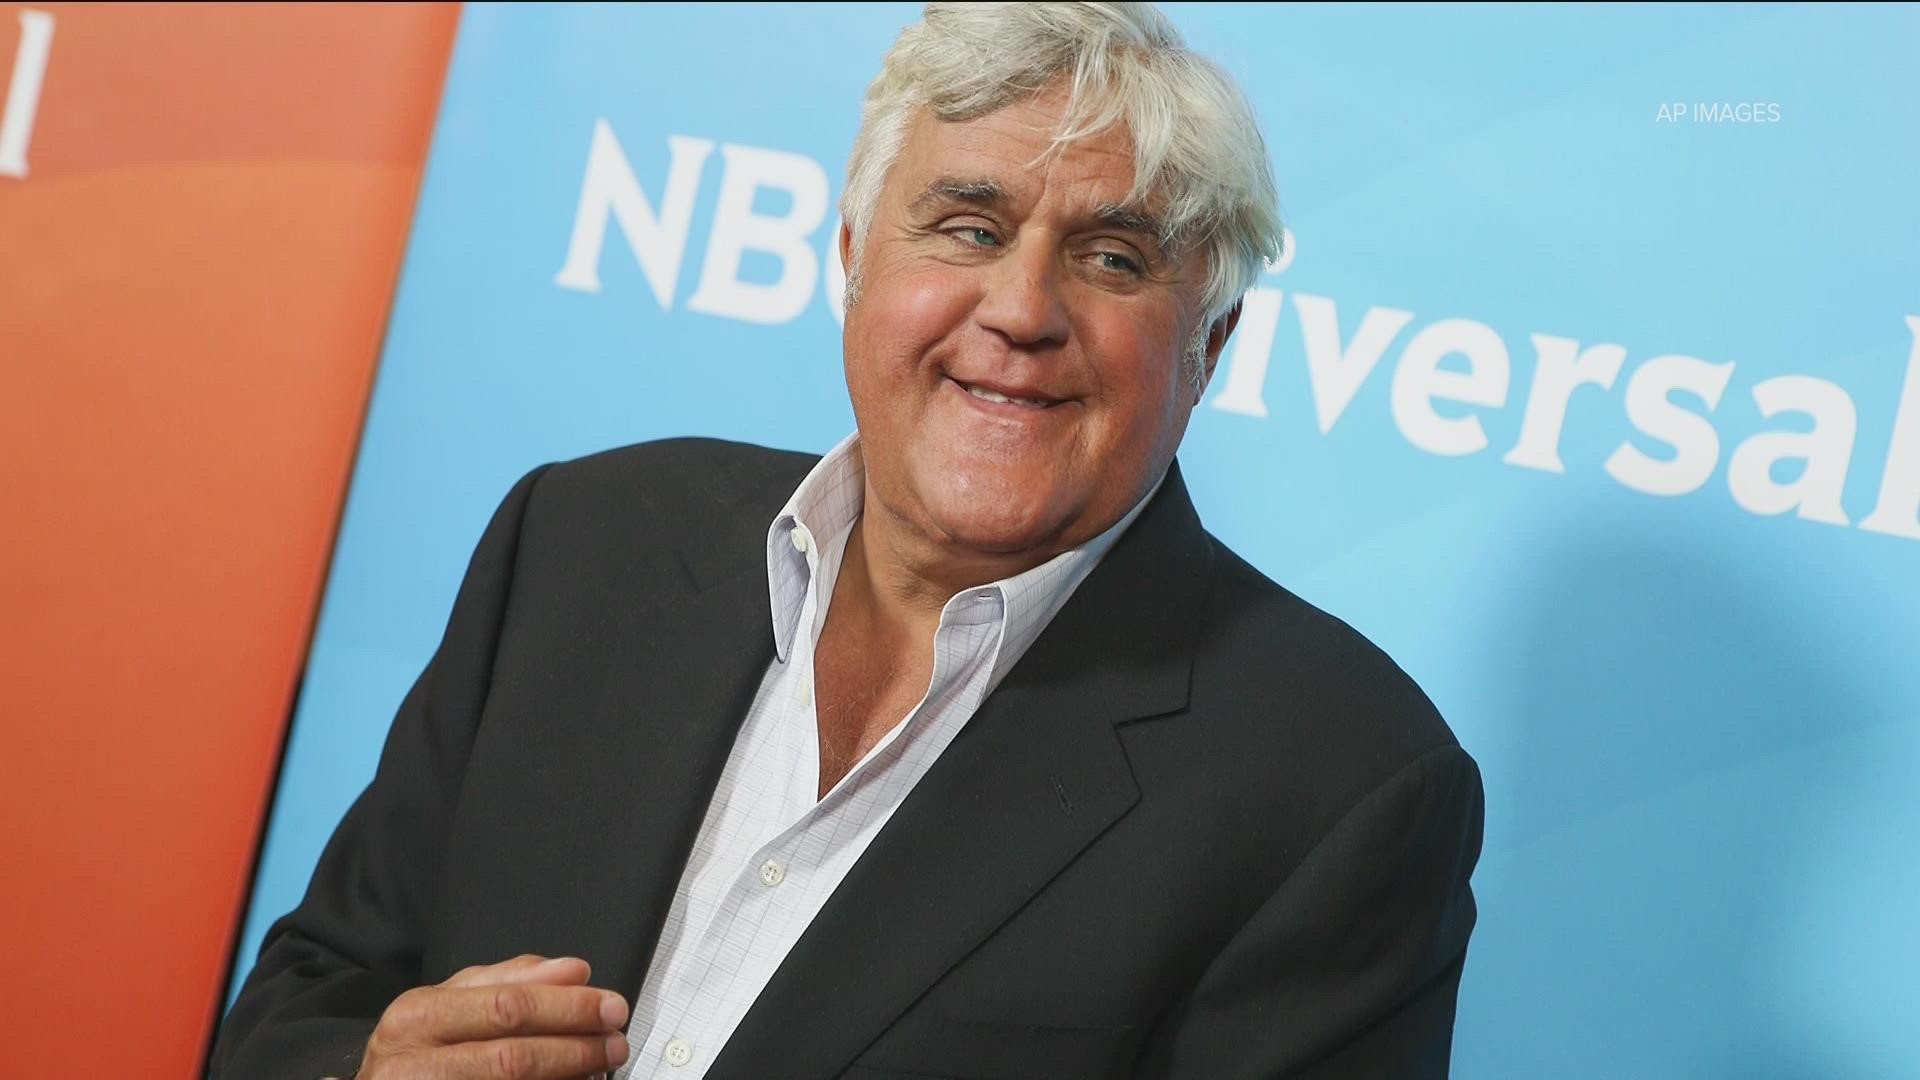 Leno told Variety that he just needs some time to get back on his feet after suffering "serious burns."